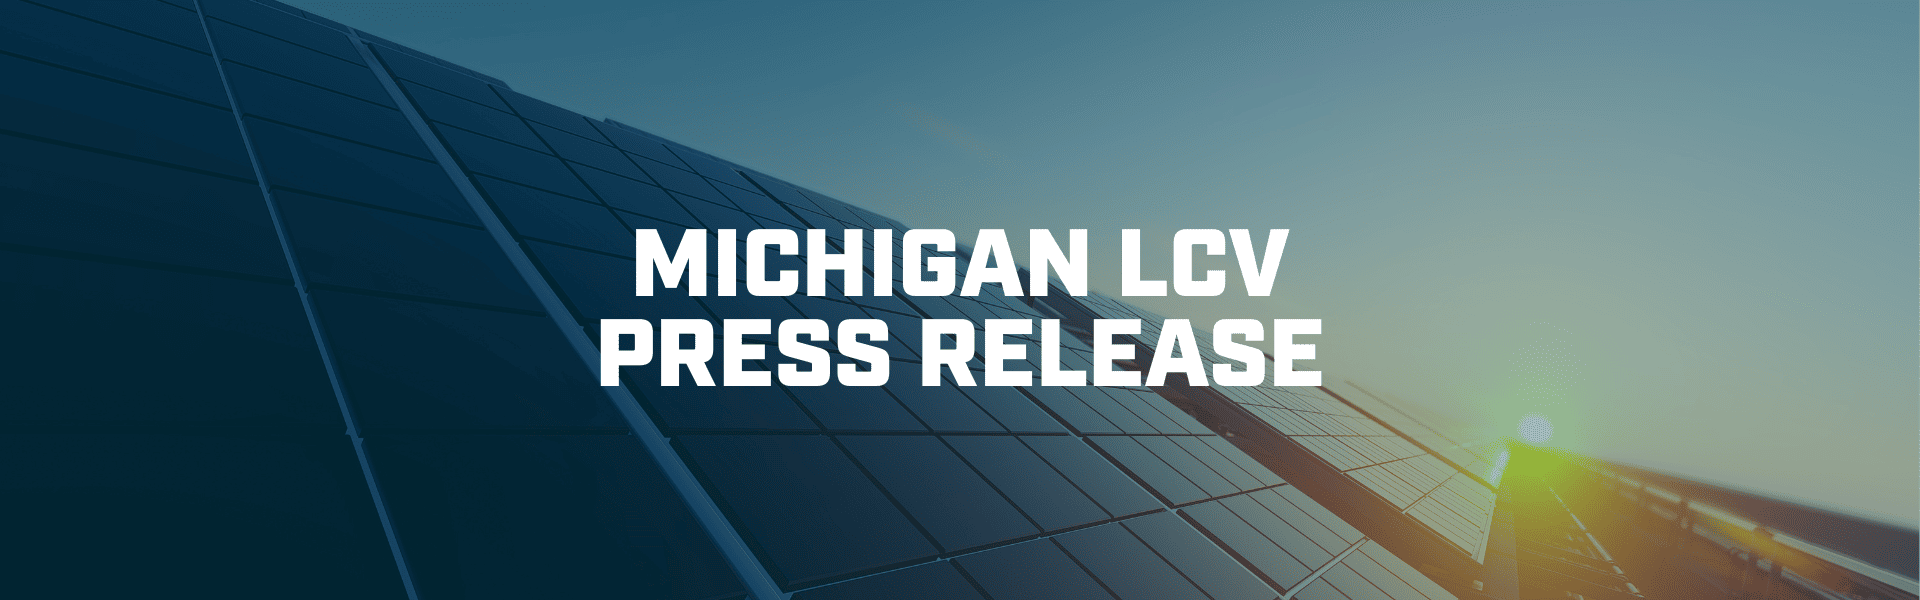 Gov. Whitmer budget invests in clean energy, protecting our water